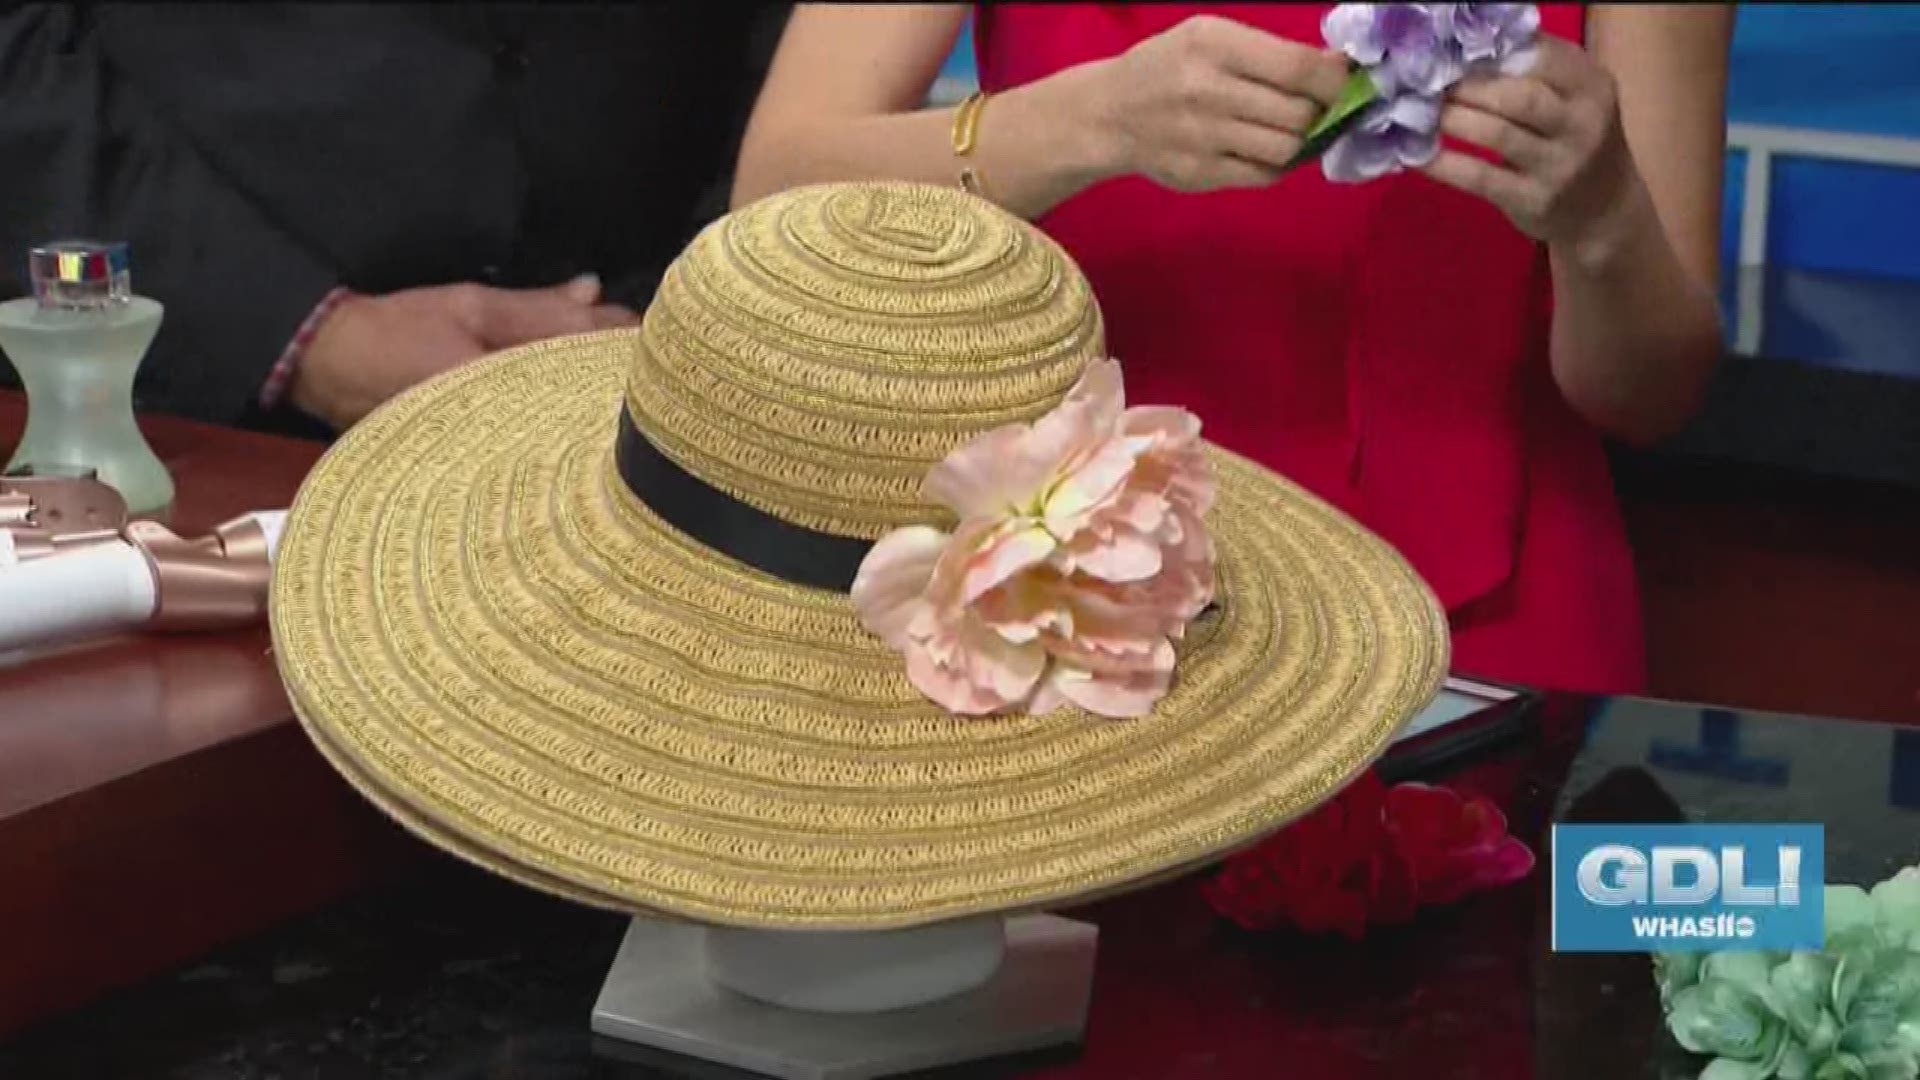 Catherine Jones Kung stopped by Great Day Live to share some style tips and tricks.